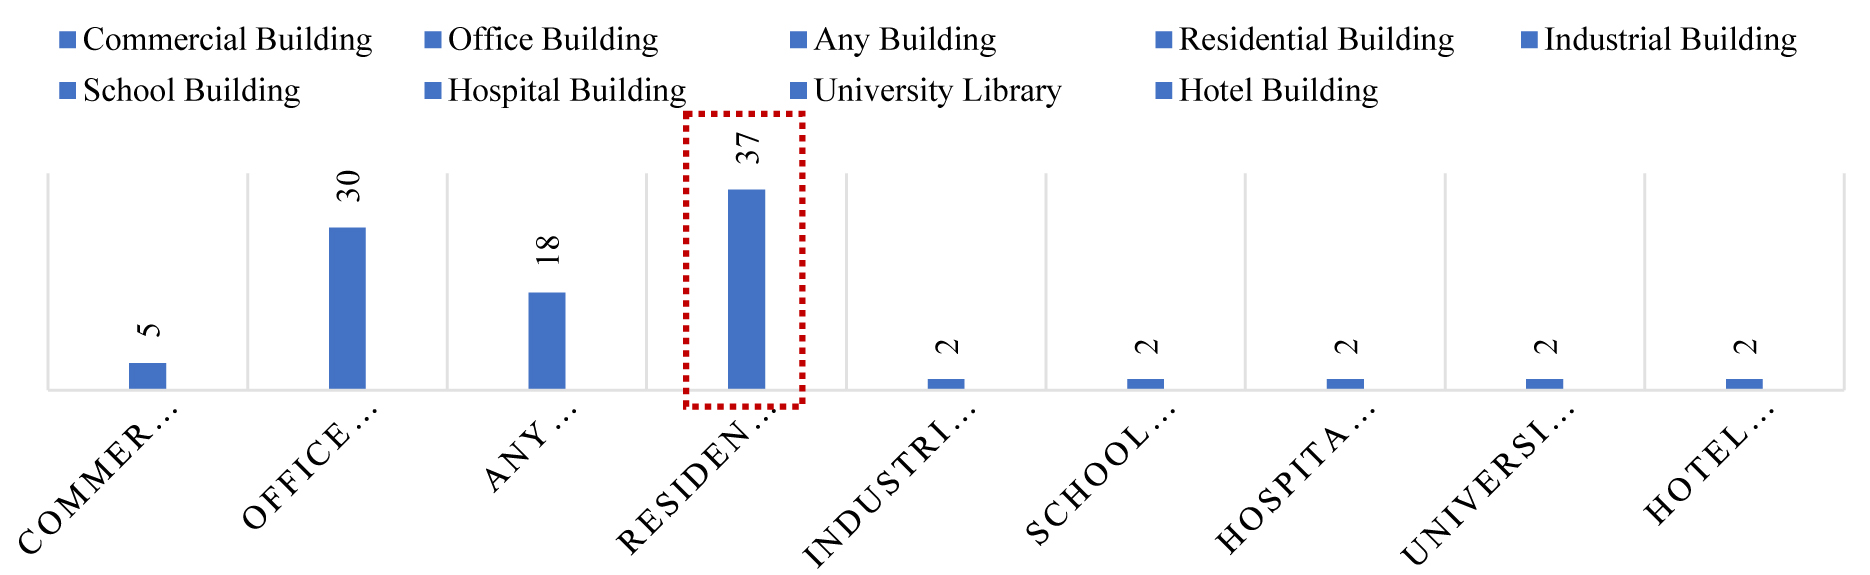 The extent to which buildings are used in the research background section.